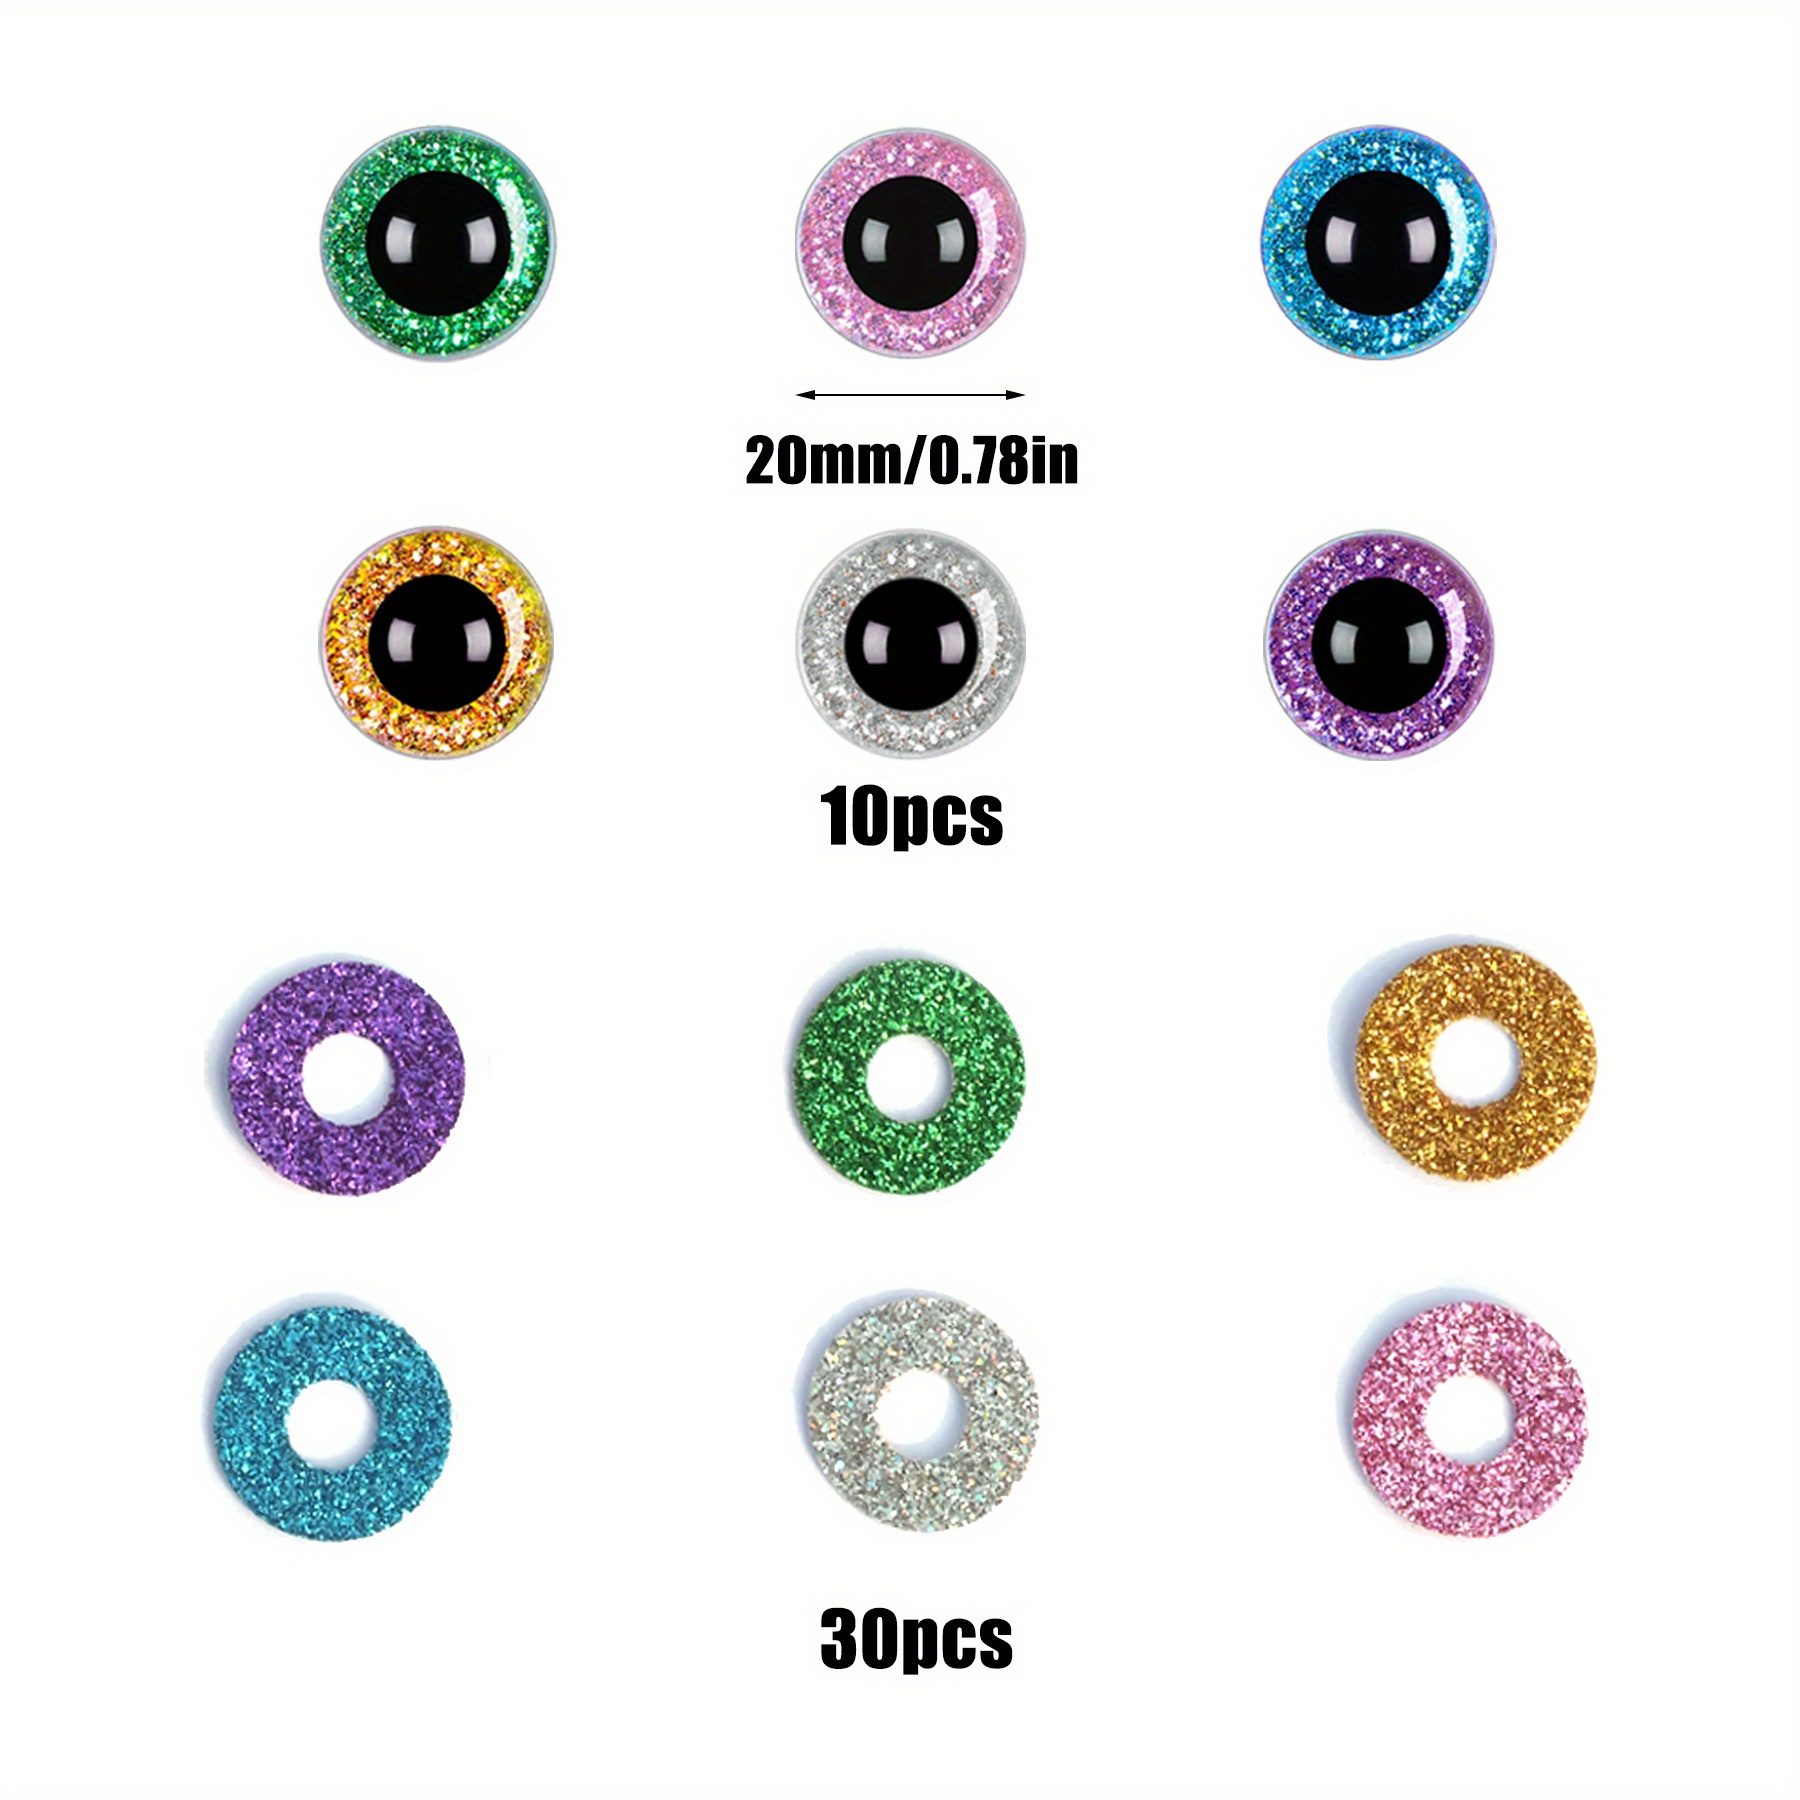 Tebru Safety Eyes with Colorful Glitter Washer Accessories for Puppet Toy  Stuffed Animals Dolls,Plush Toy Eyes,DIY Craft Supplies 